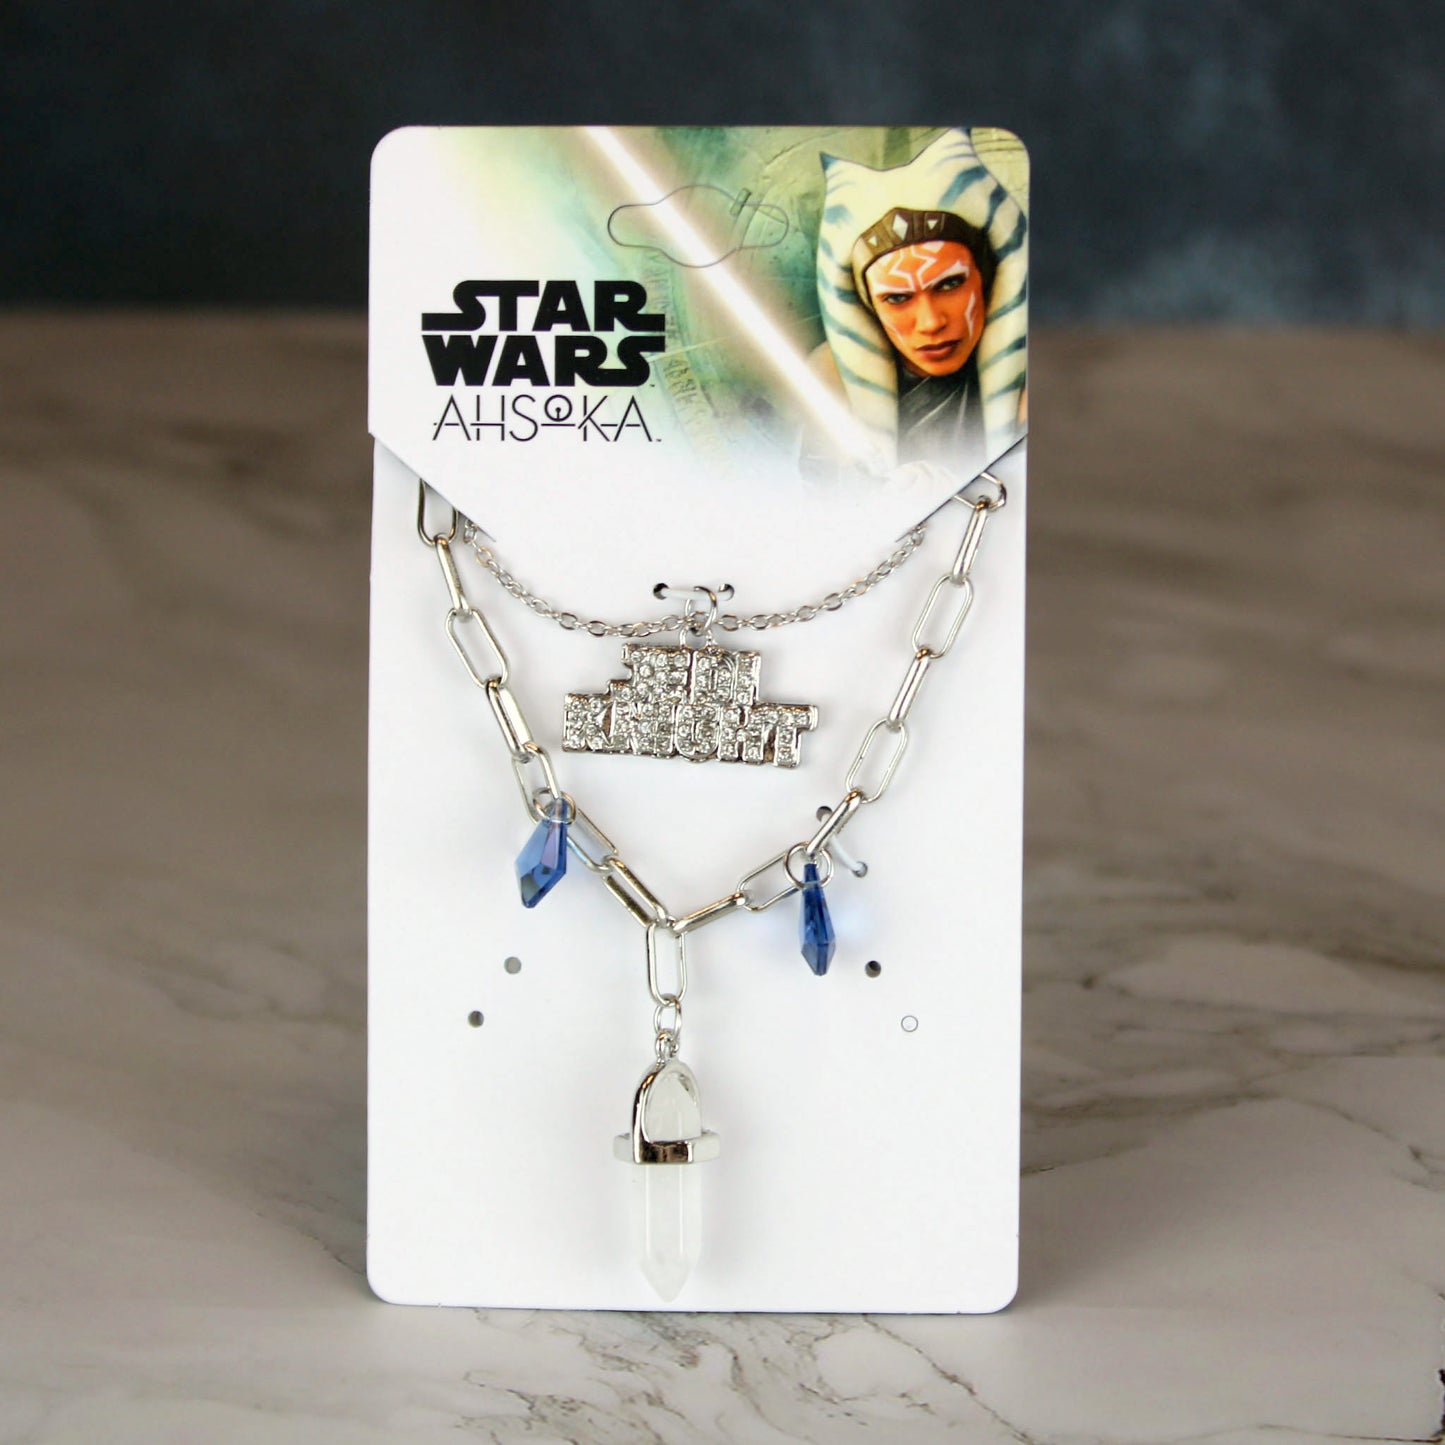 Star Wars Galactic Empire Pendant for Geek , Gold Vermeil Star Wars Necklace,  Sterling Silver 925 Star Wars Necklace - Etsy